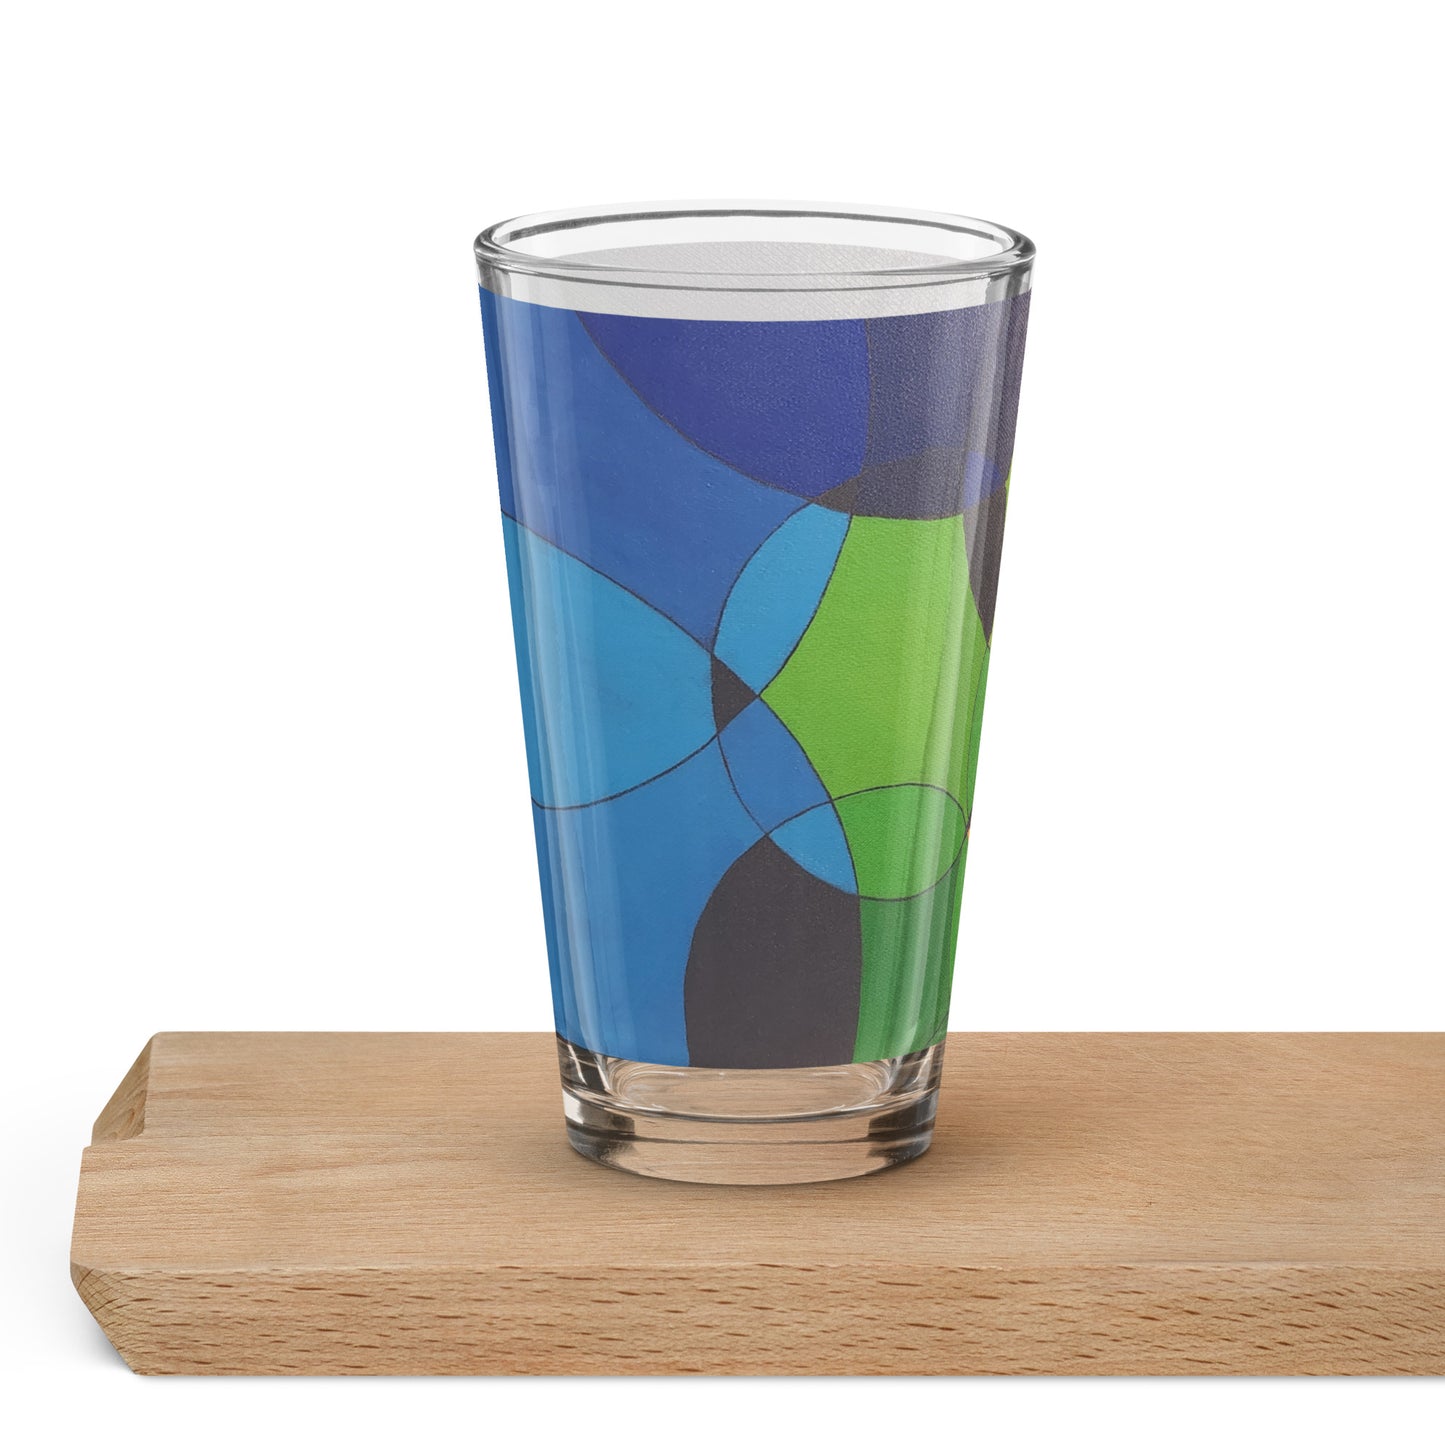 Spiral Circles in Rainbow Shaker pint glass